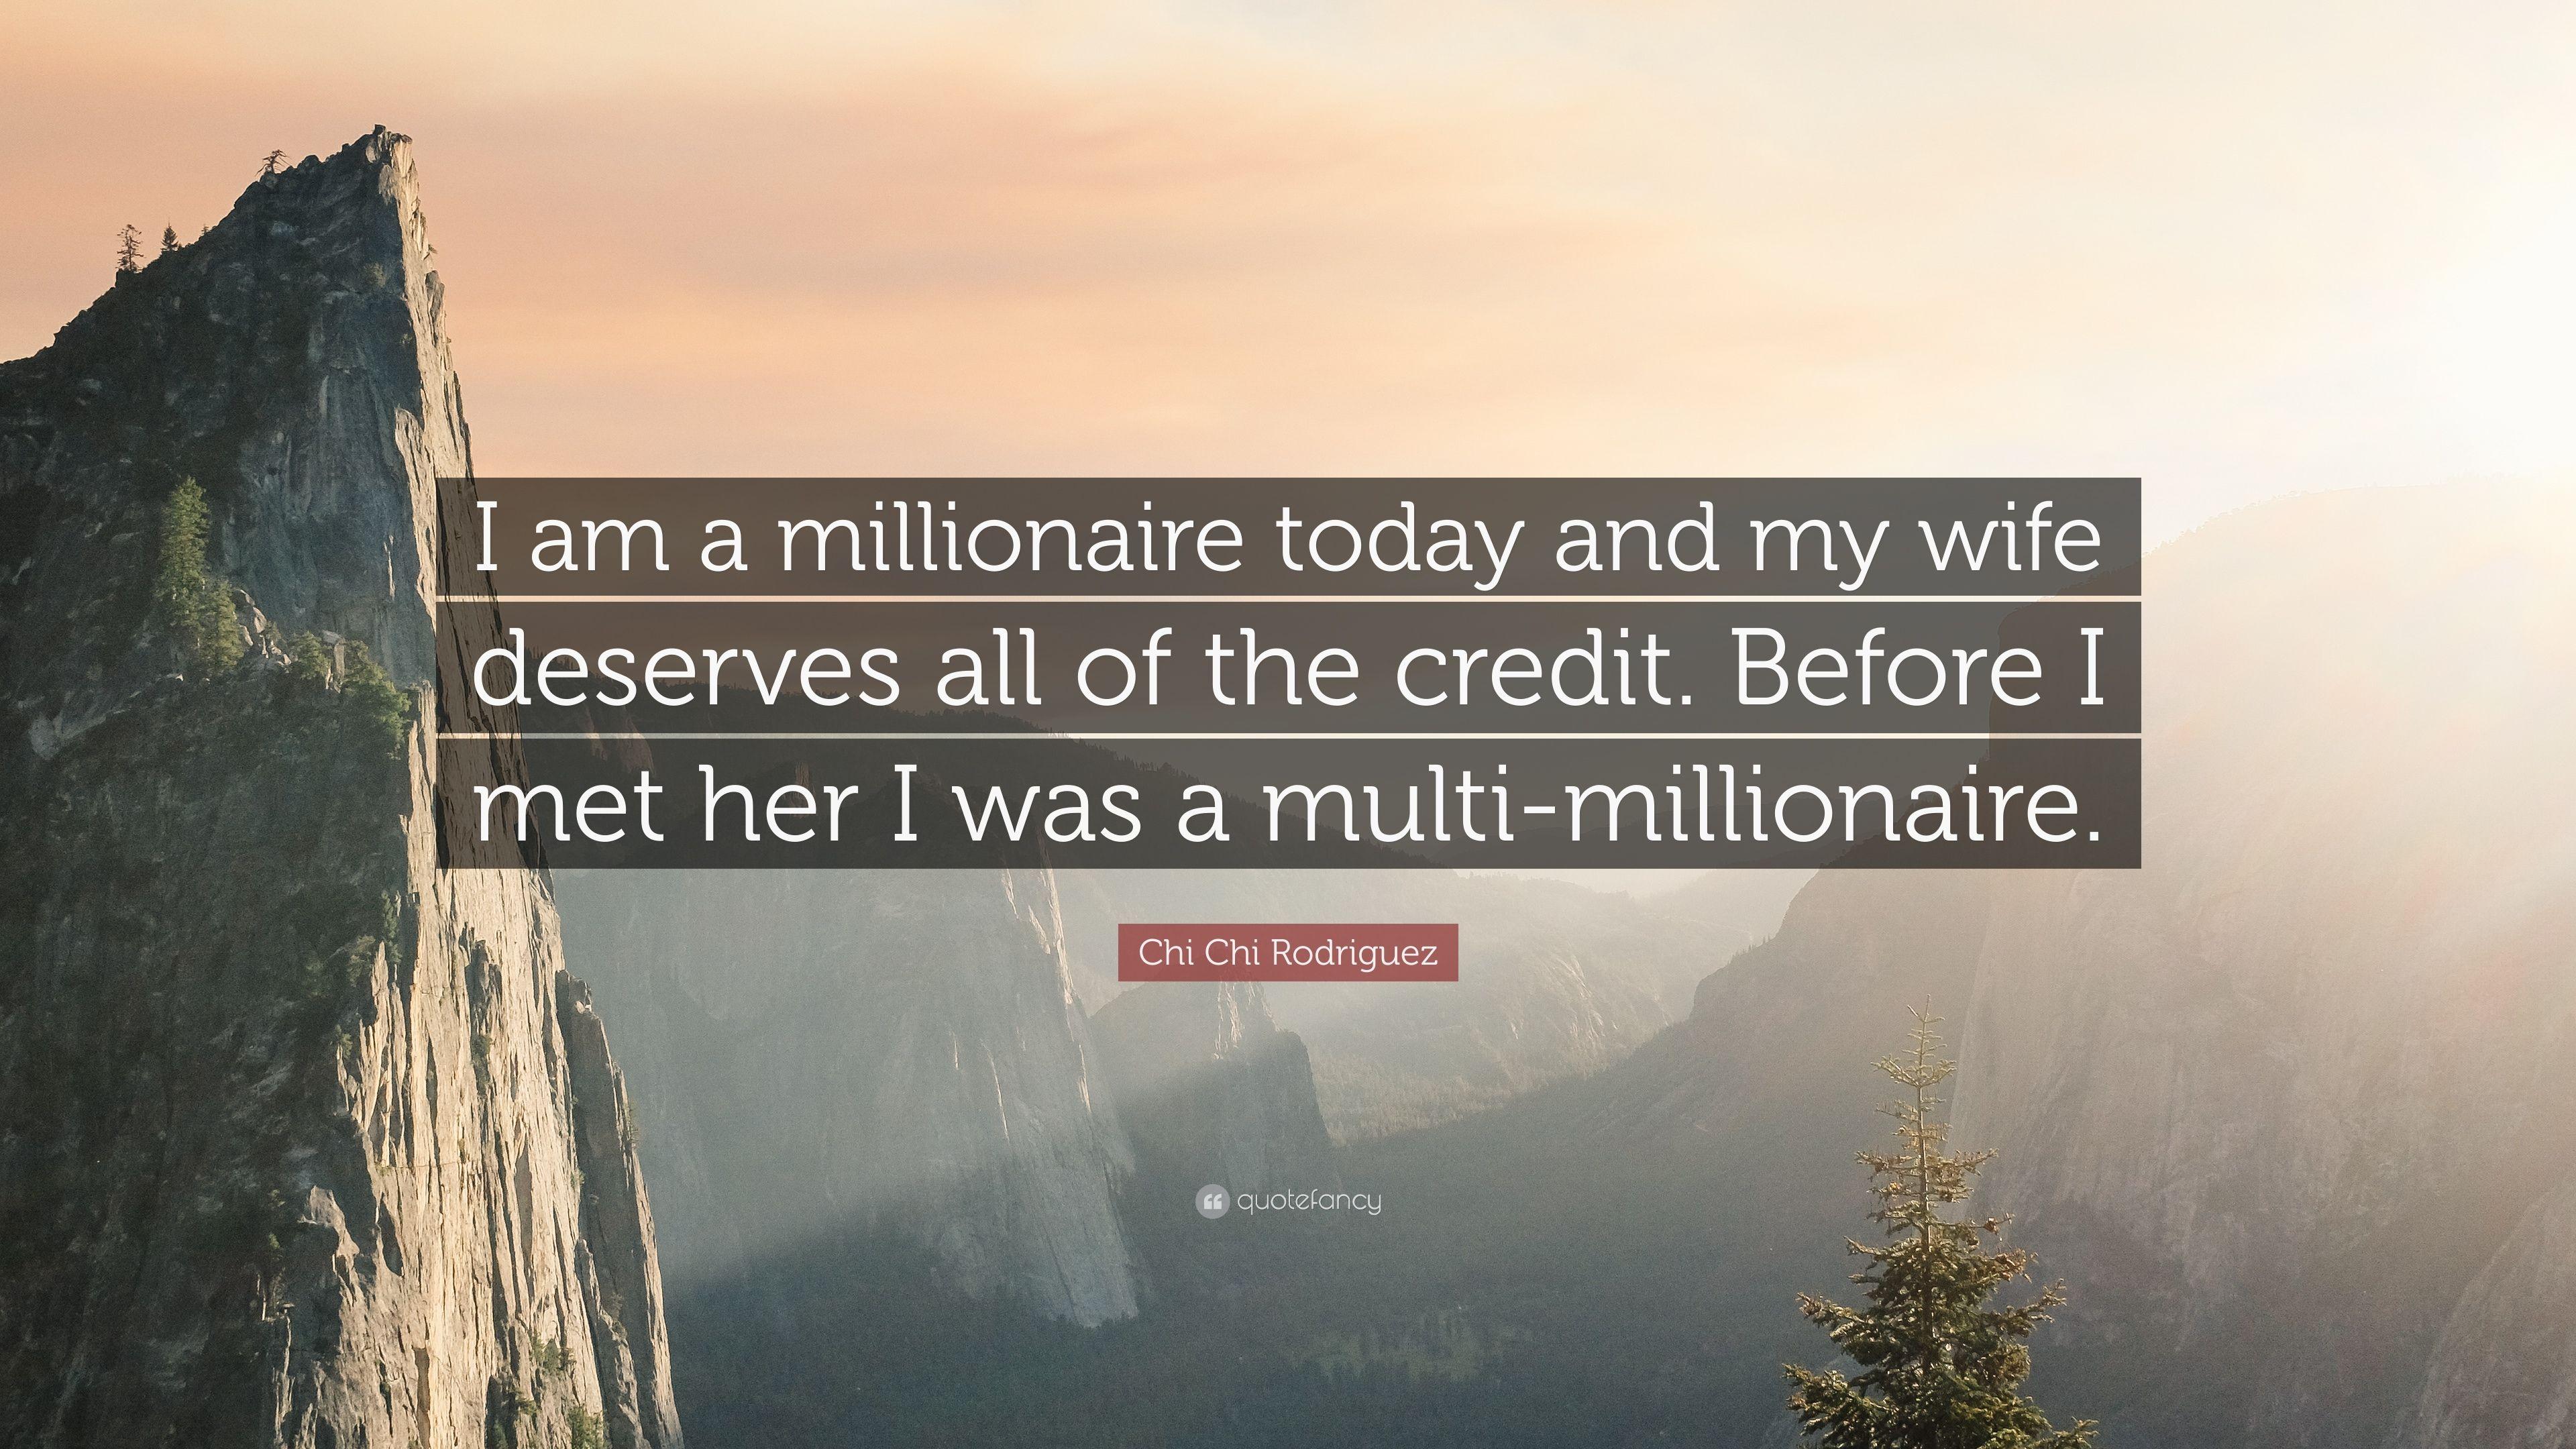 Chi Chi Rodriguez Quote: “I am a millionaire today and my wife